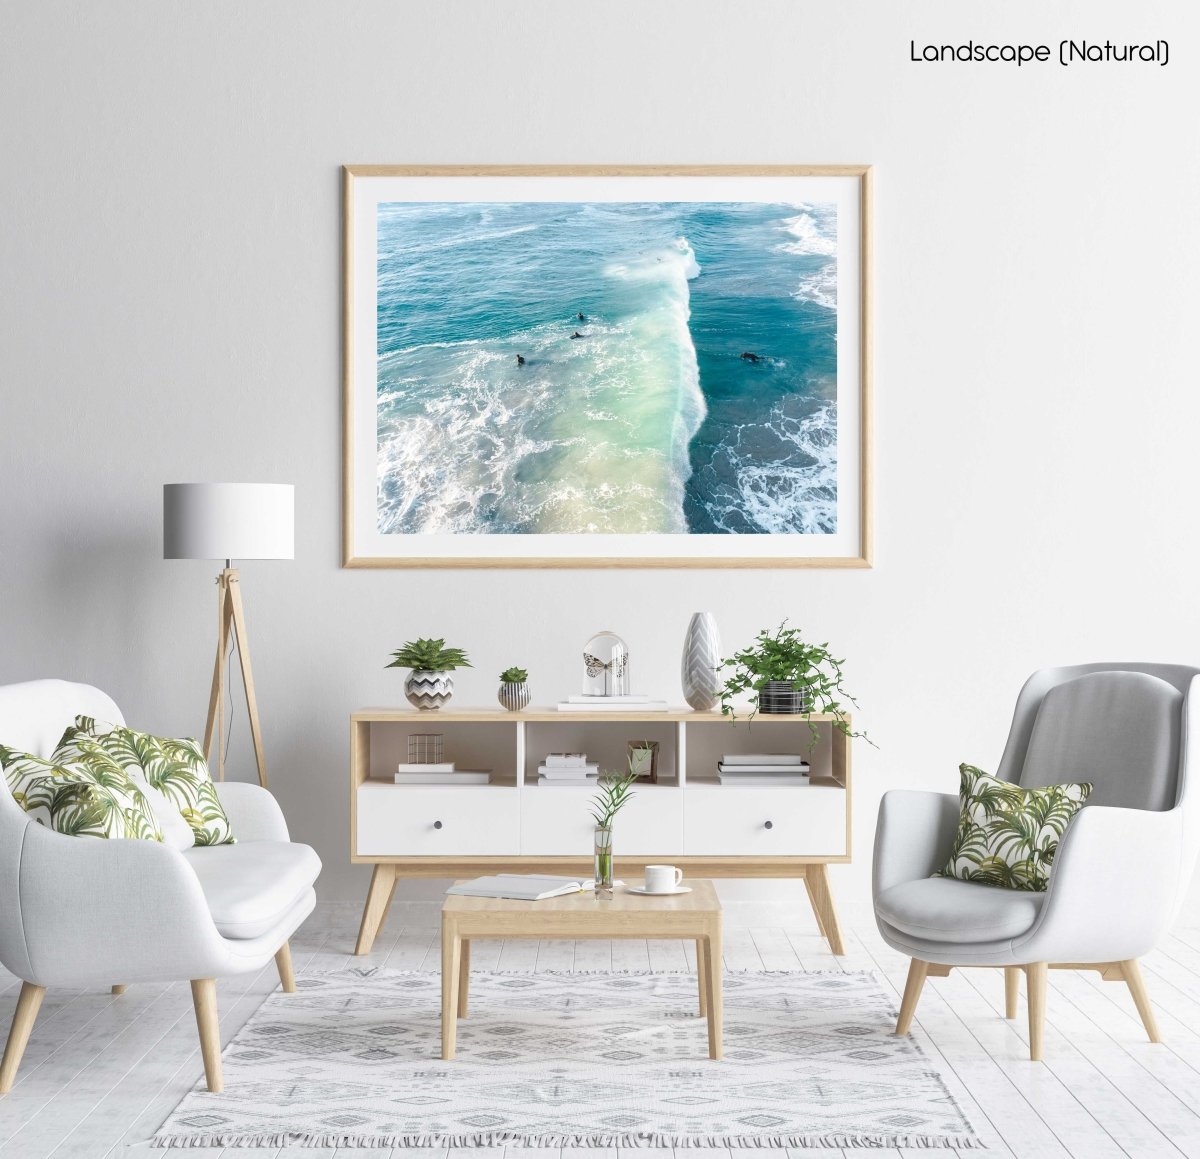 Wave crashing over surfer from above in Sandy Bay beach Cape Town in a white fine art frame